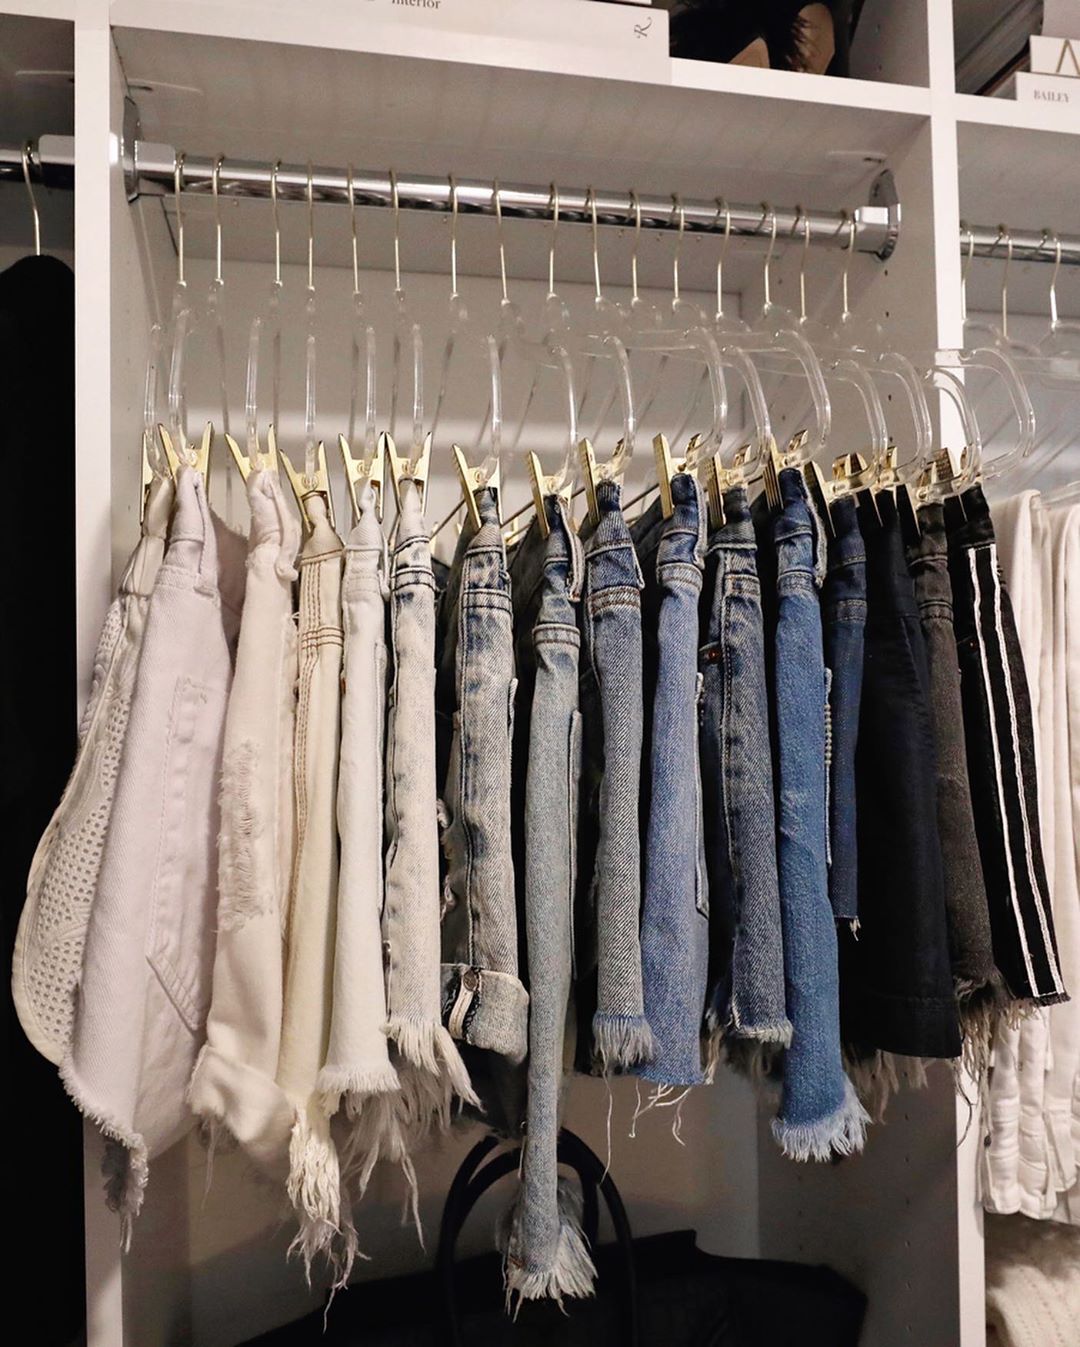 How to organise your closet